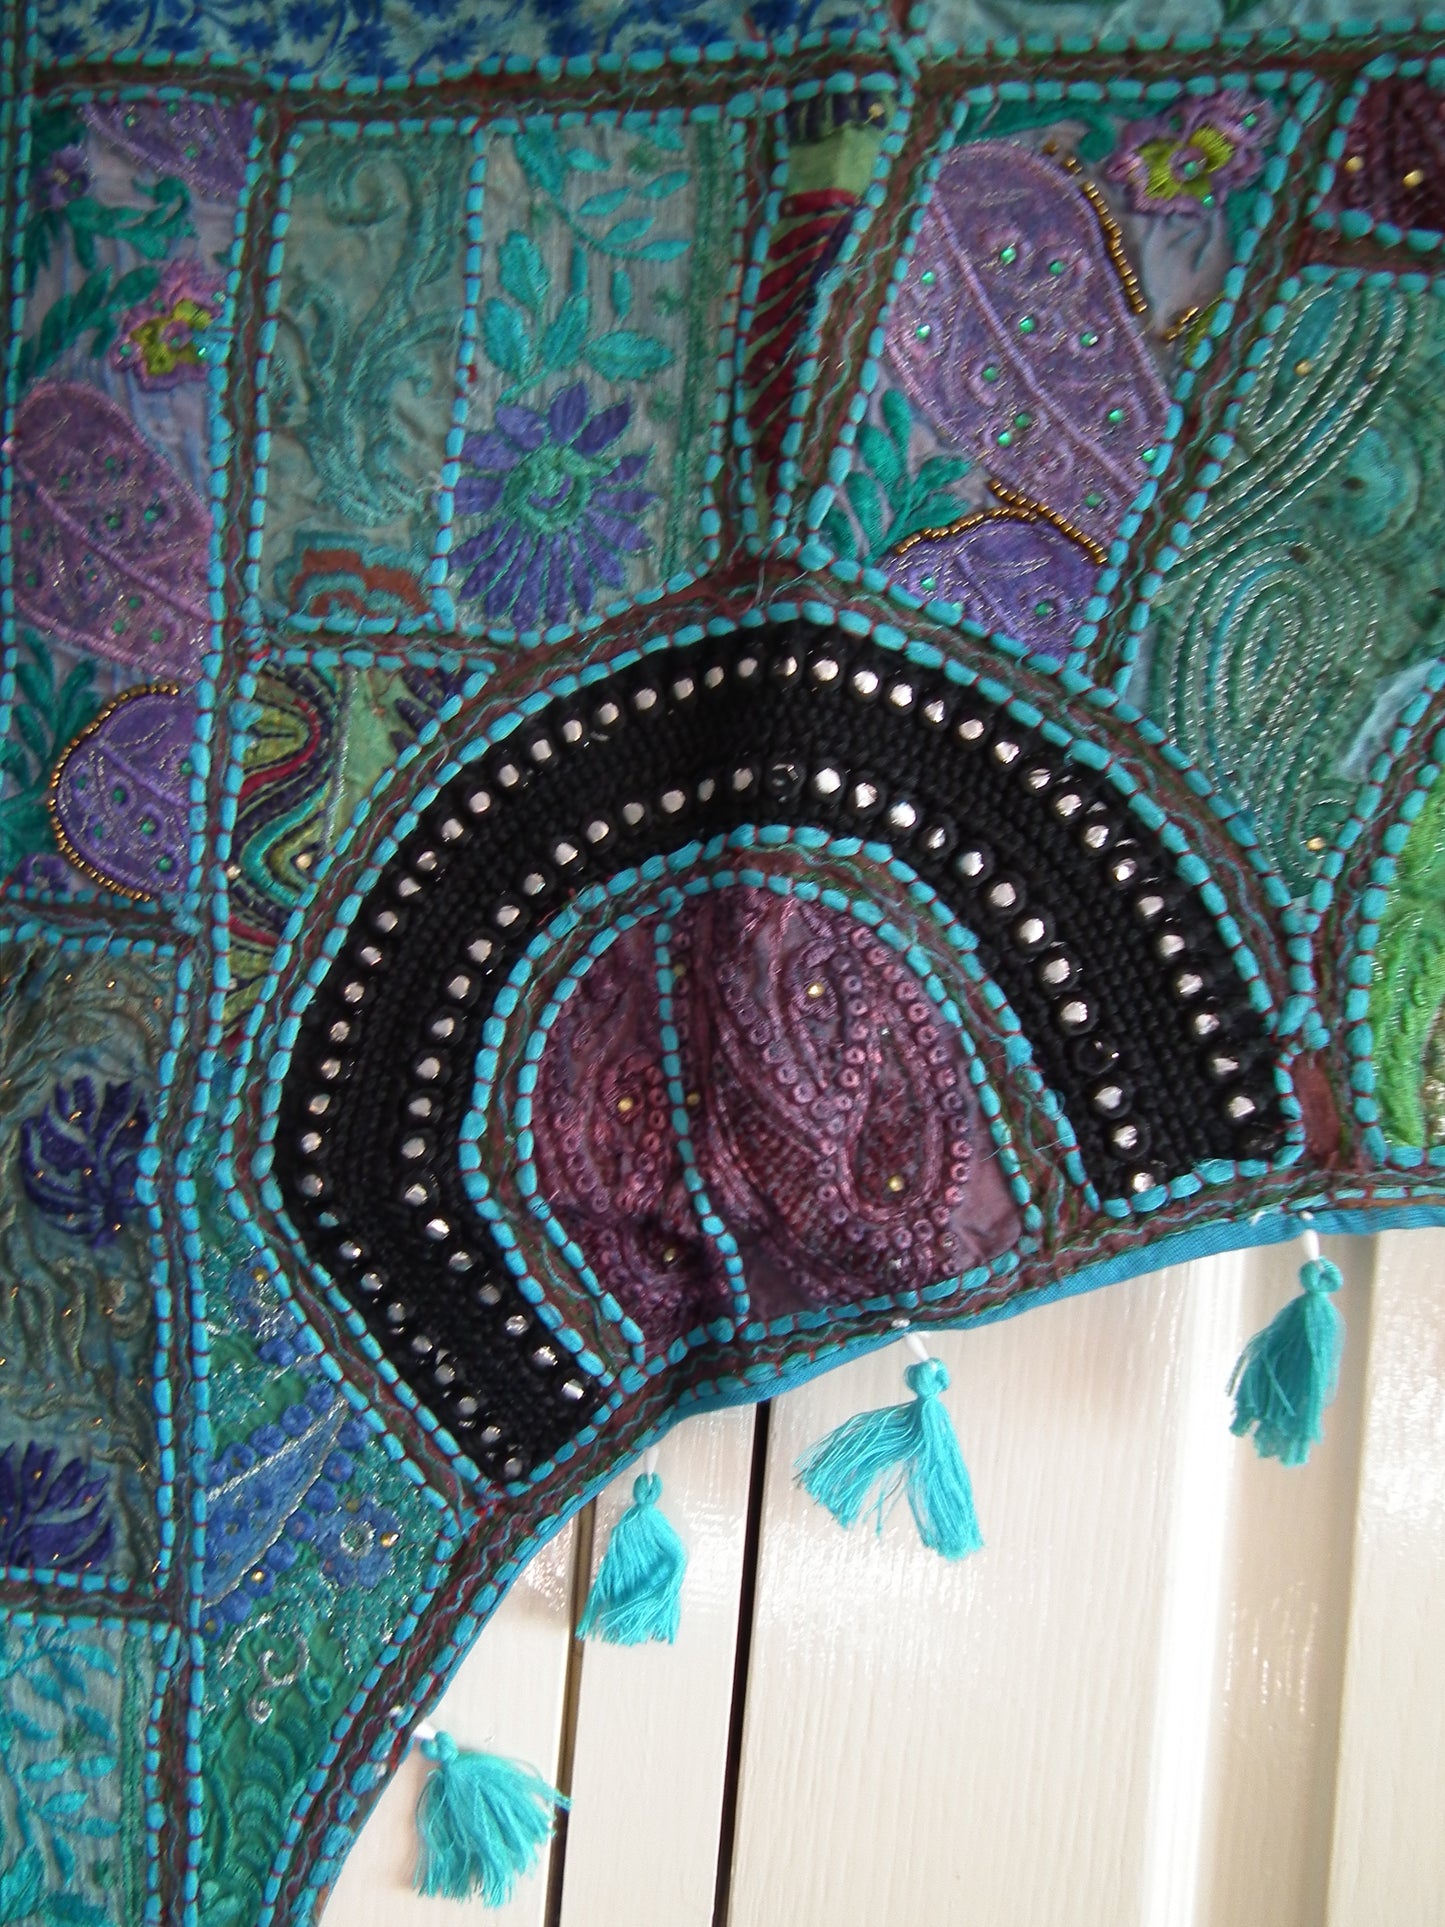 WALL HANGINGS-patchwork with tassles, embroidery Wonkey Donkey Bazaar